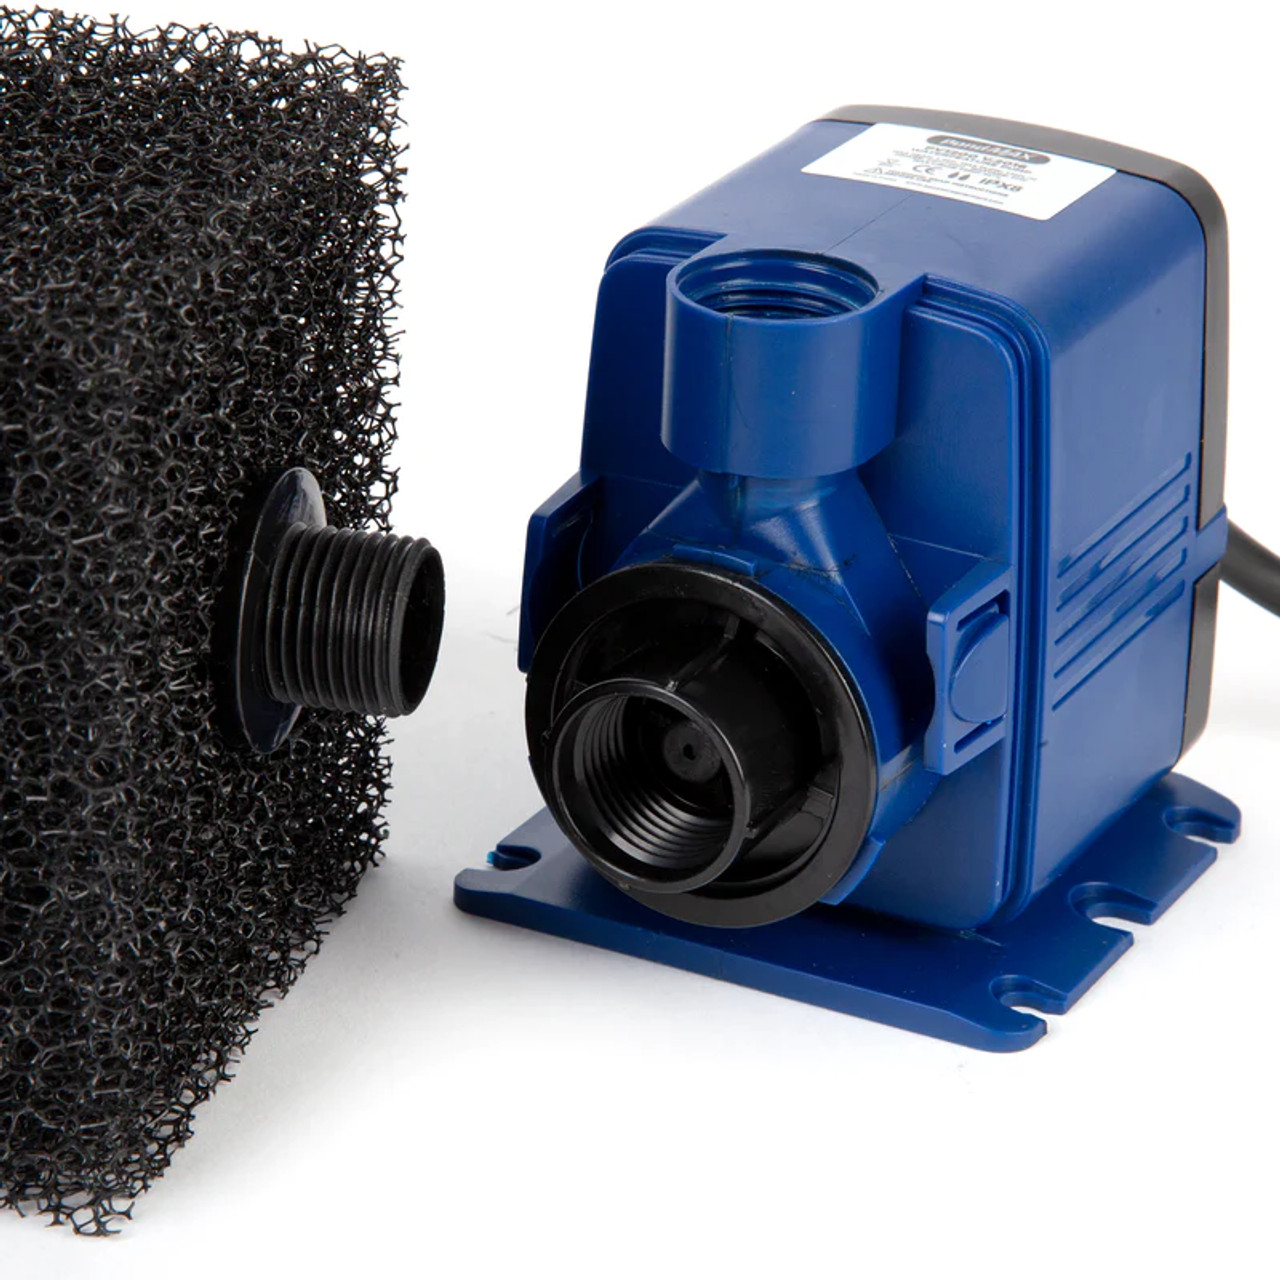 PondMAX Water Feature Pump PV650 Product image 4